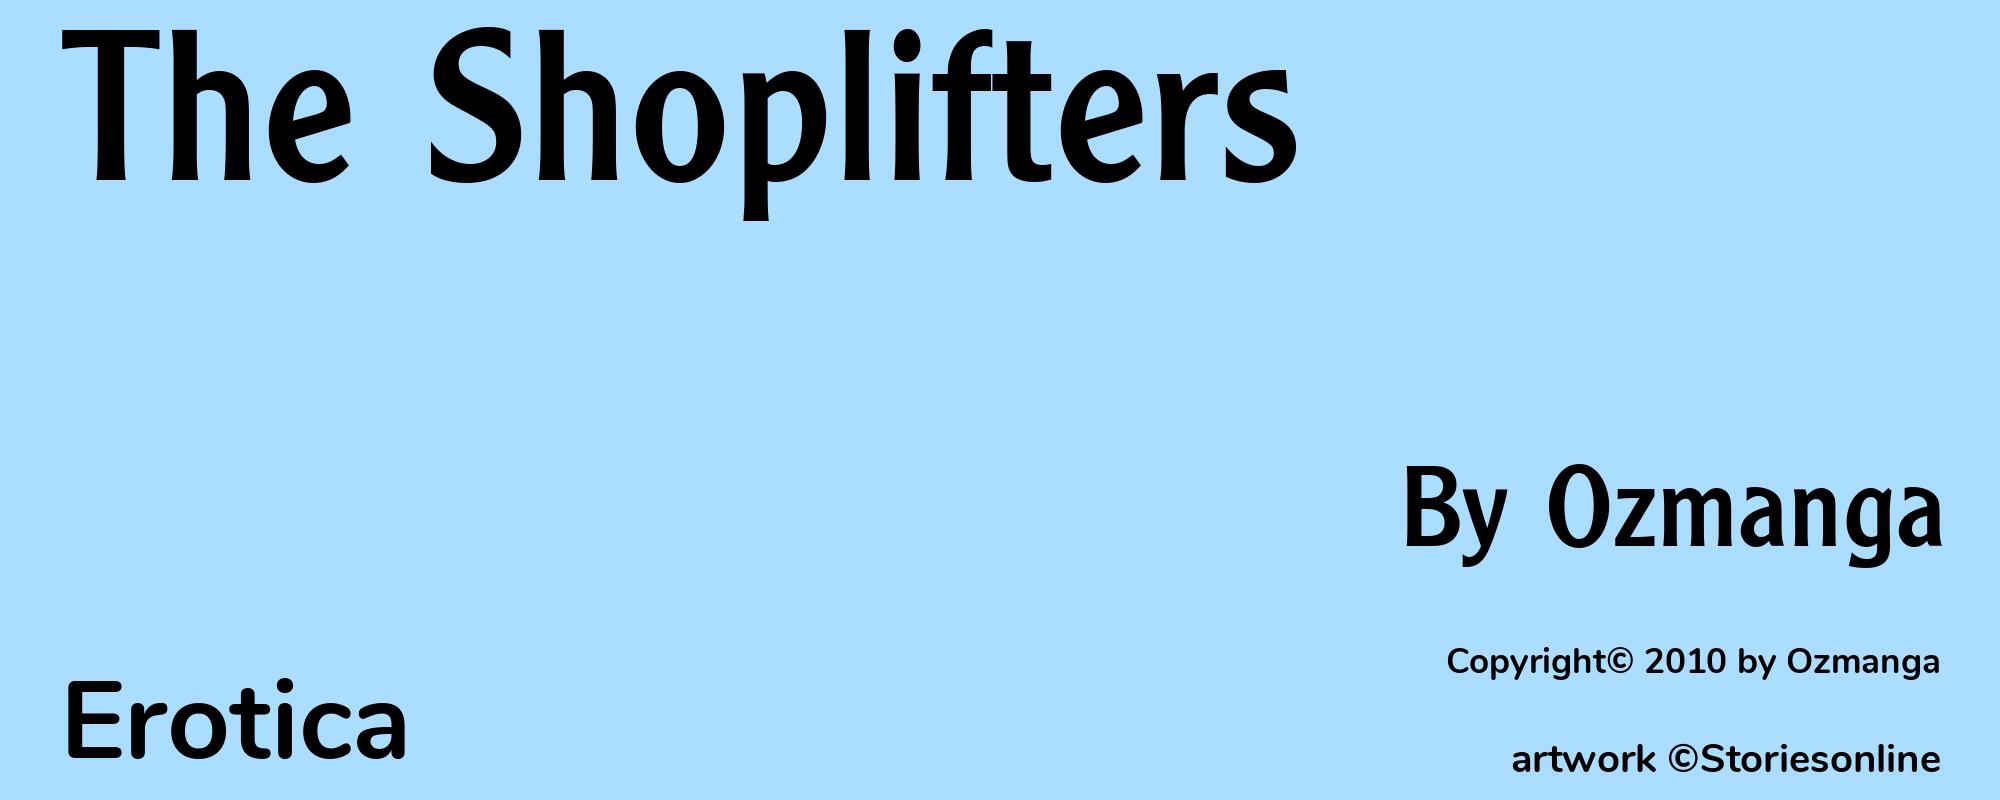 The Shoplifters - Cover